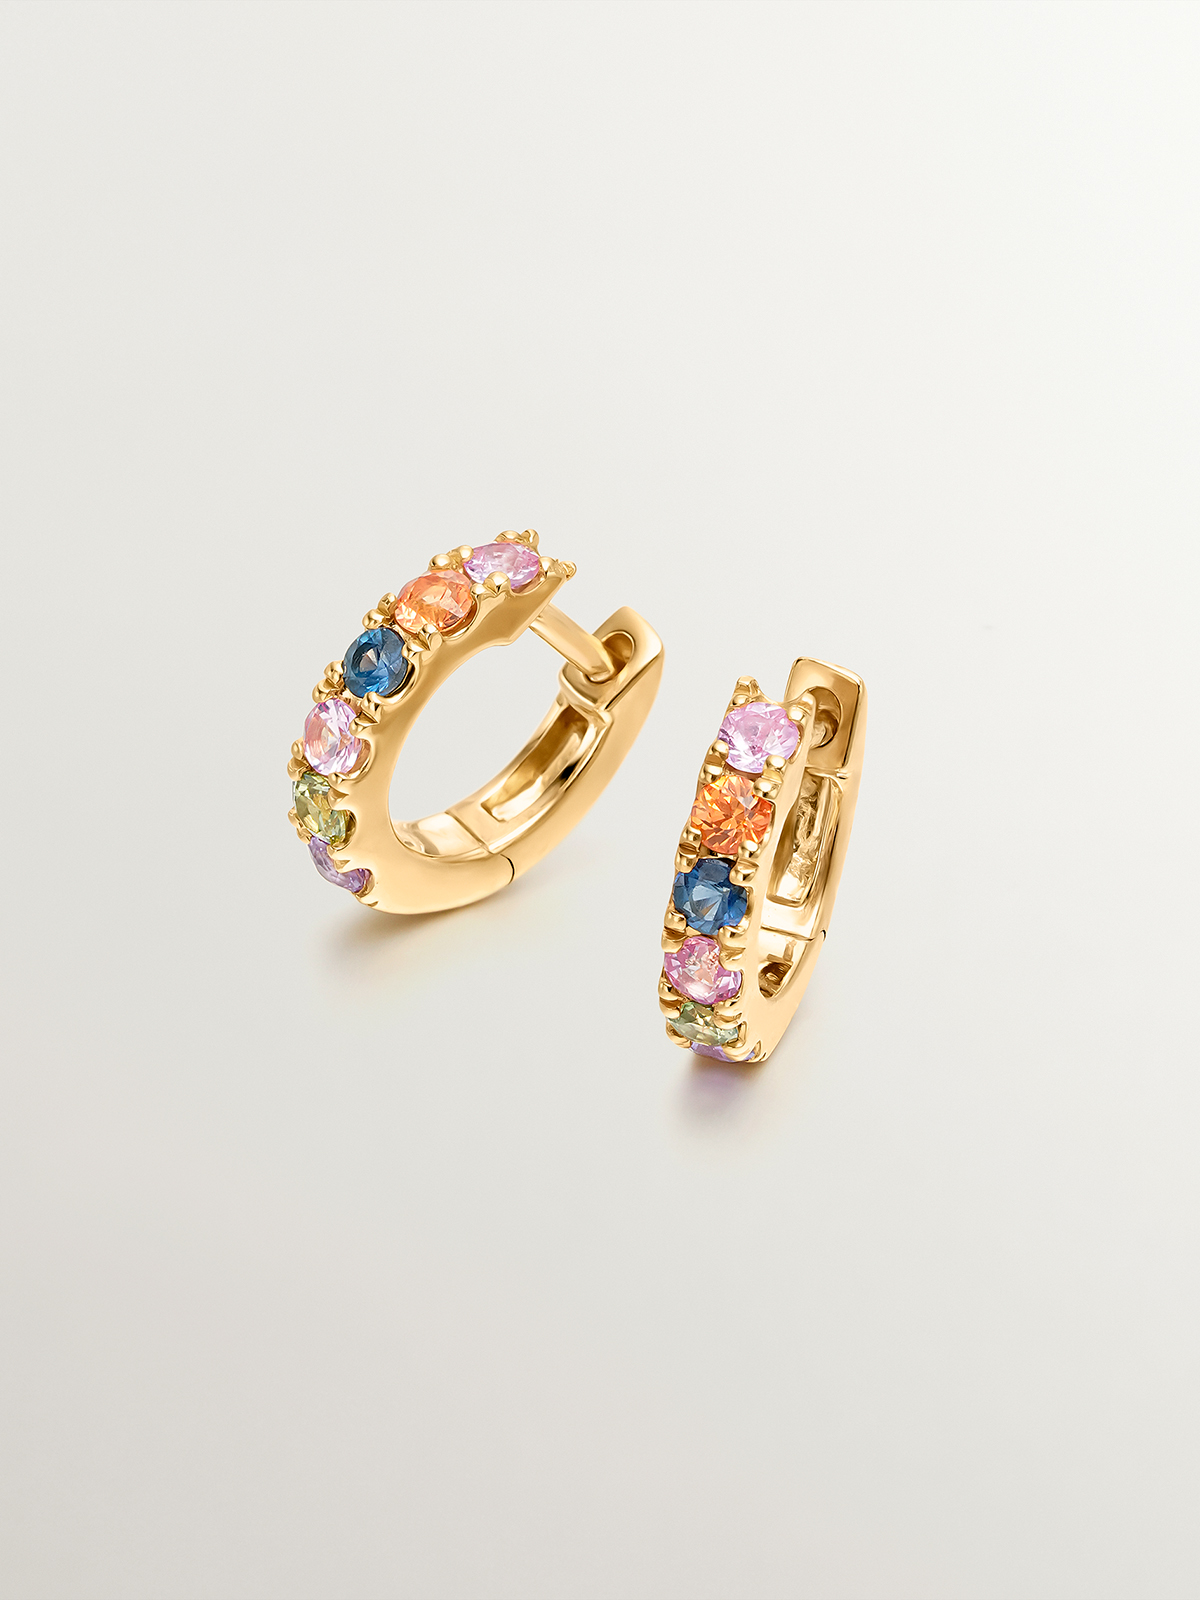 Small hoop earrings made of 925 silver coated in 18K yellow gold with multicolor sapphires.